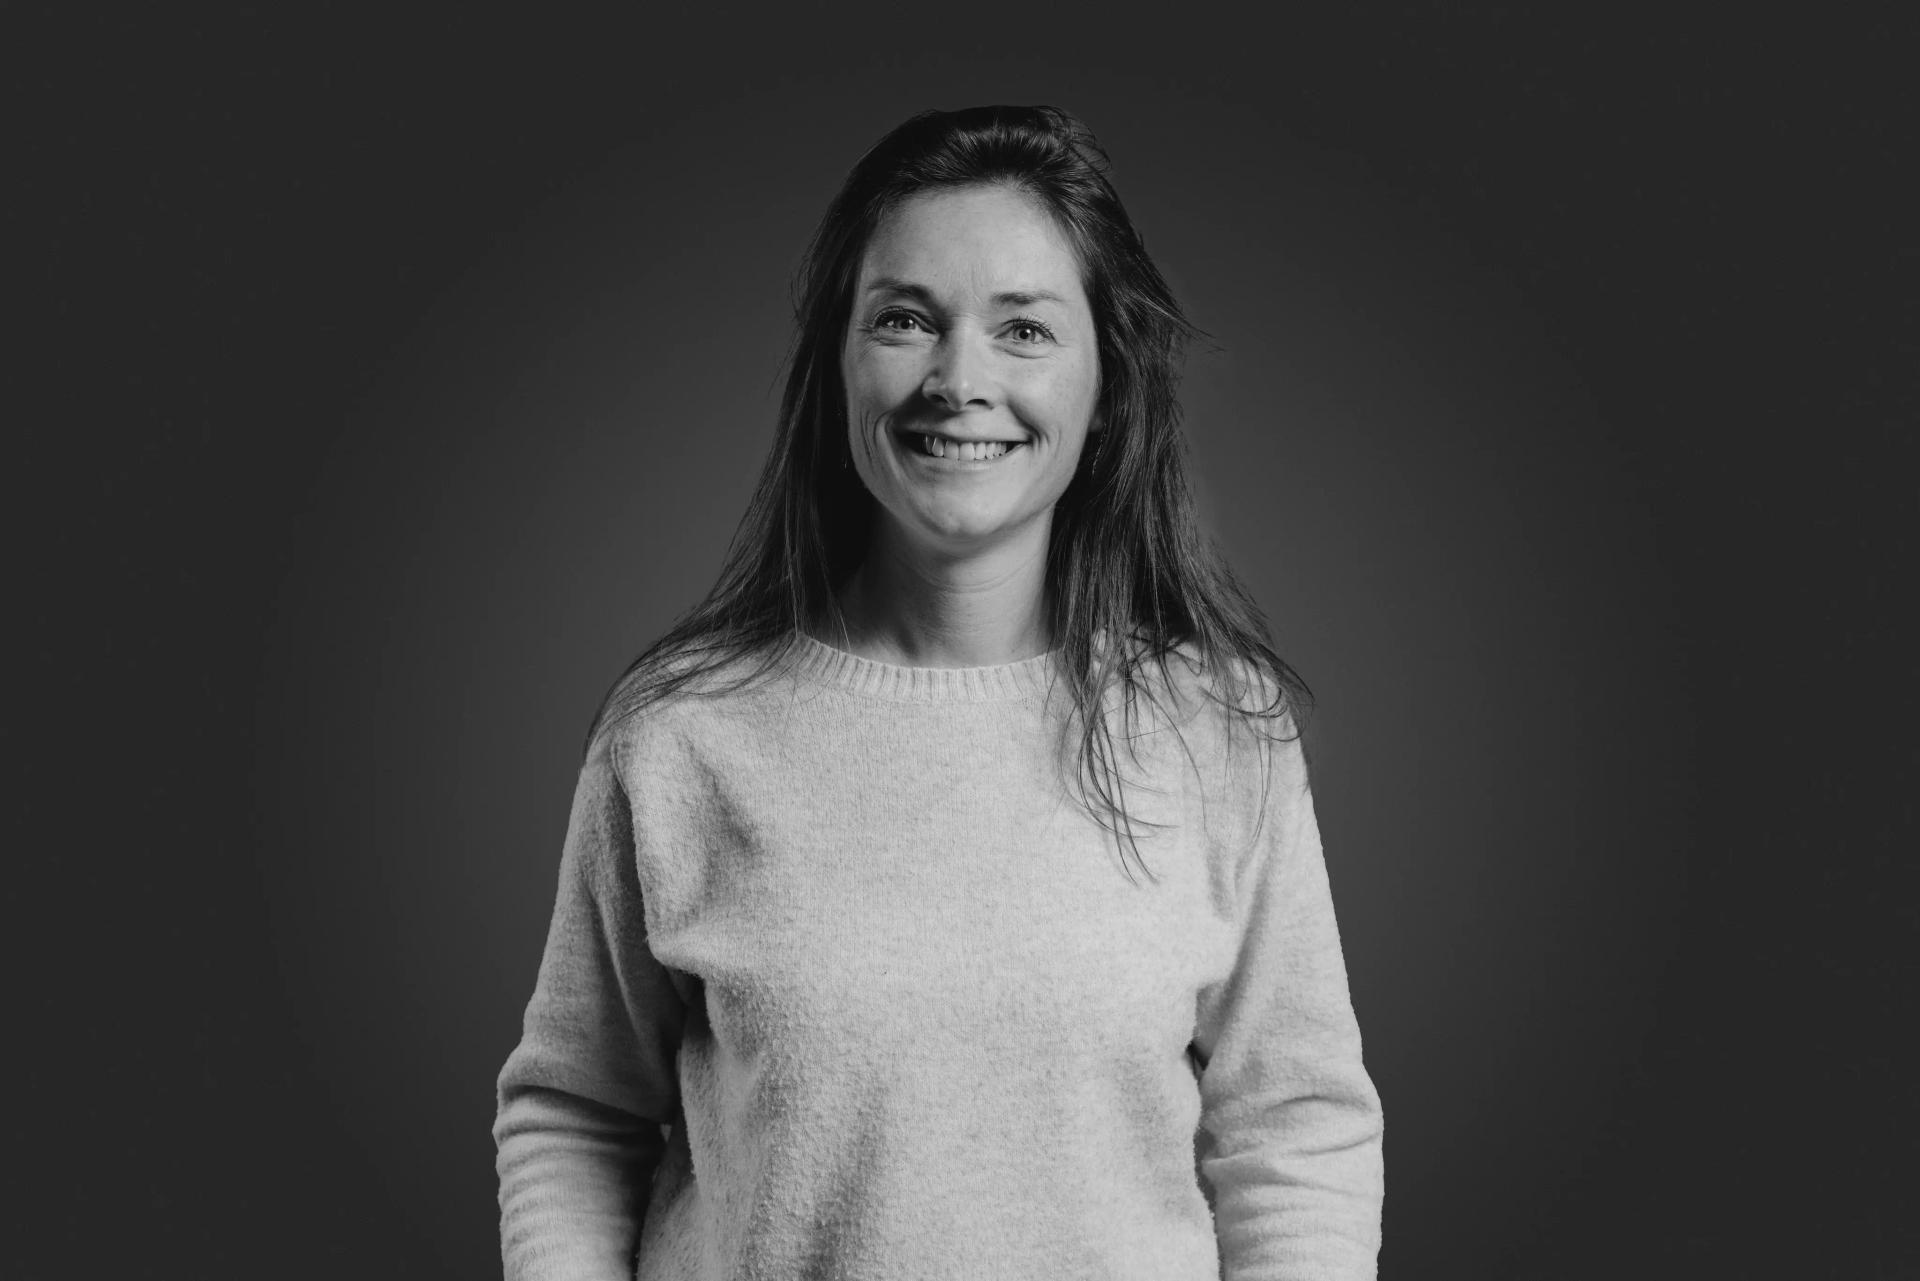 Eveline Schmedding - Product owner